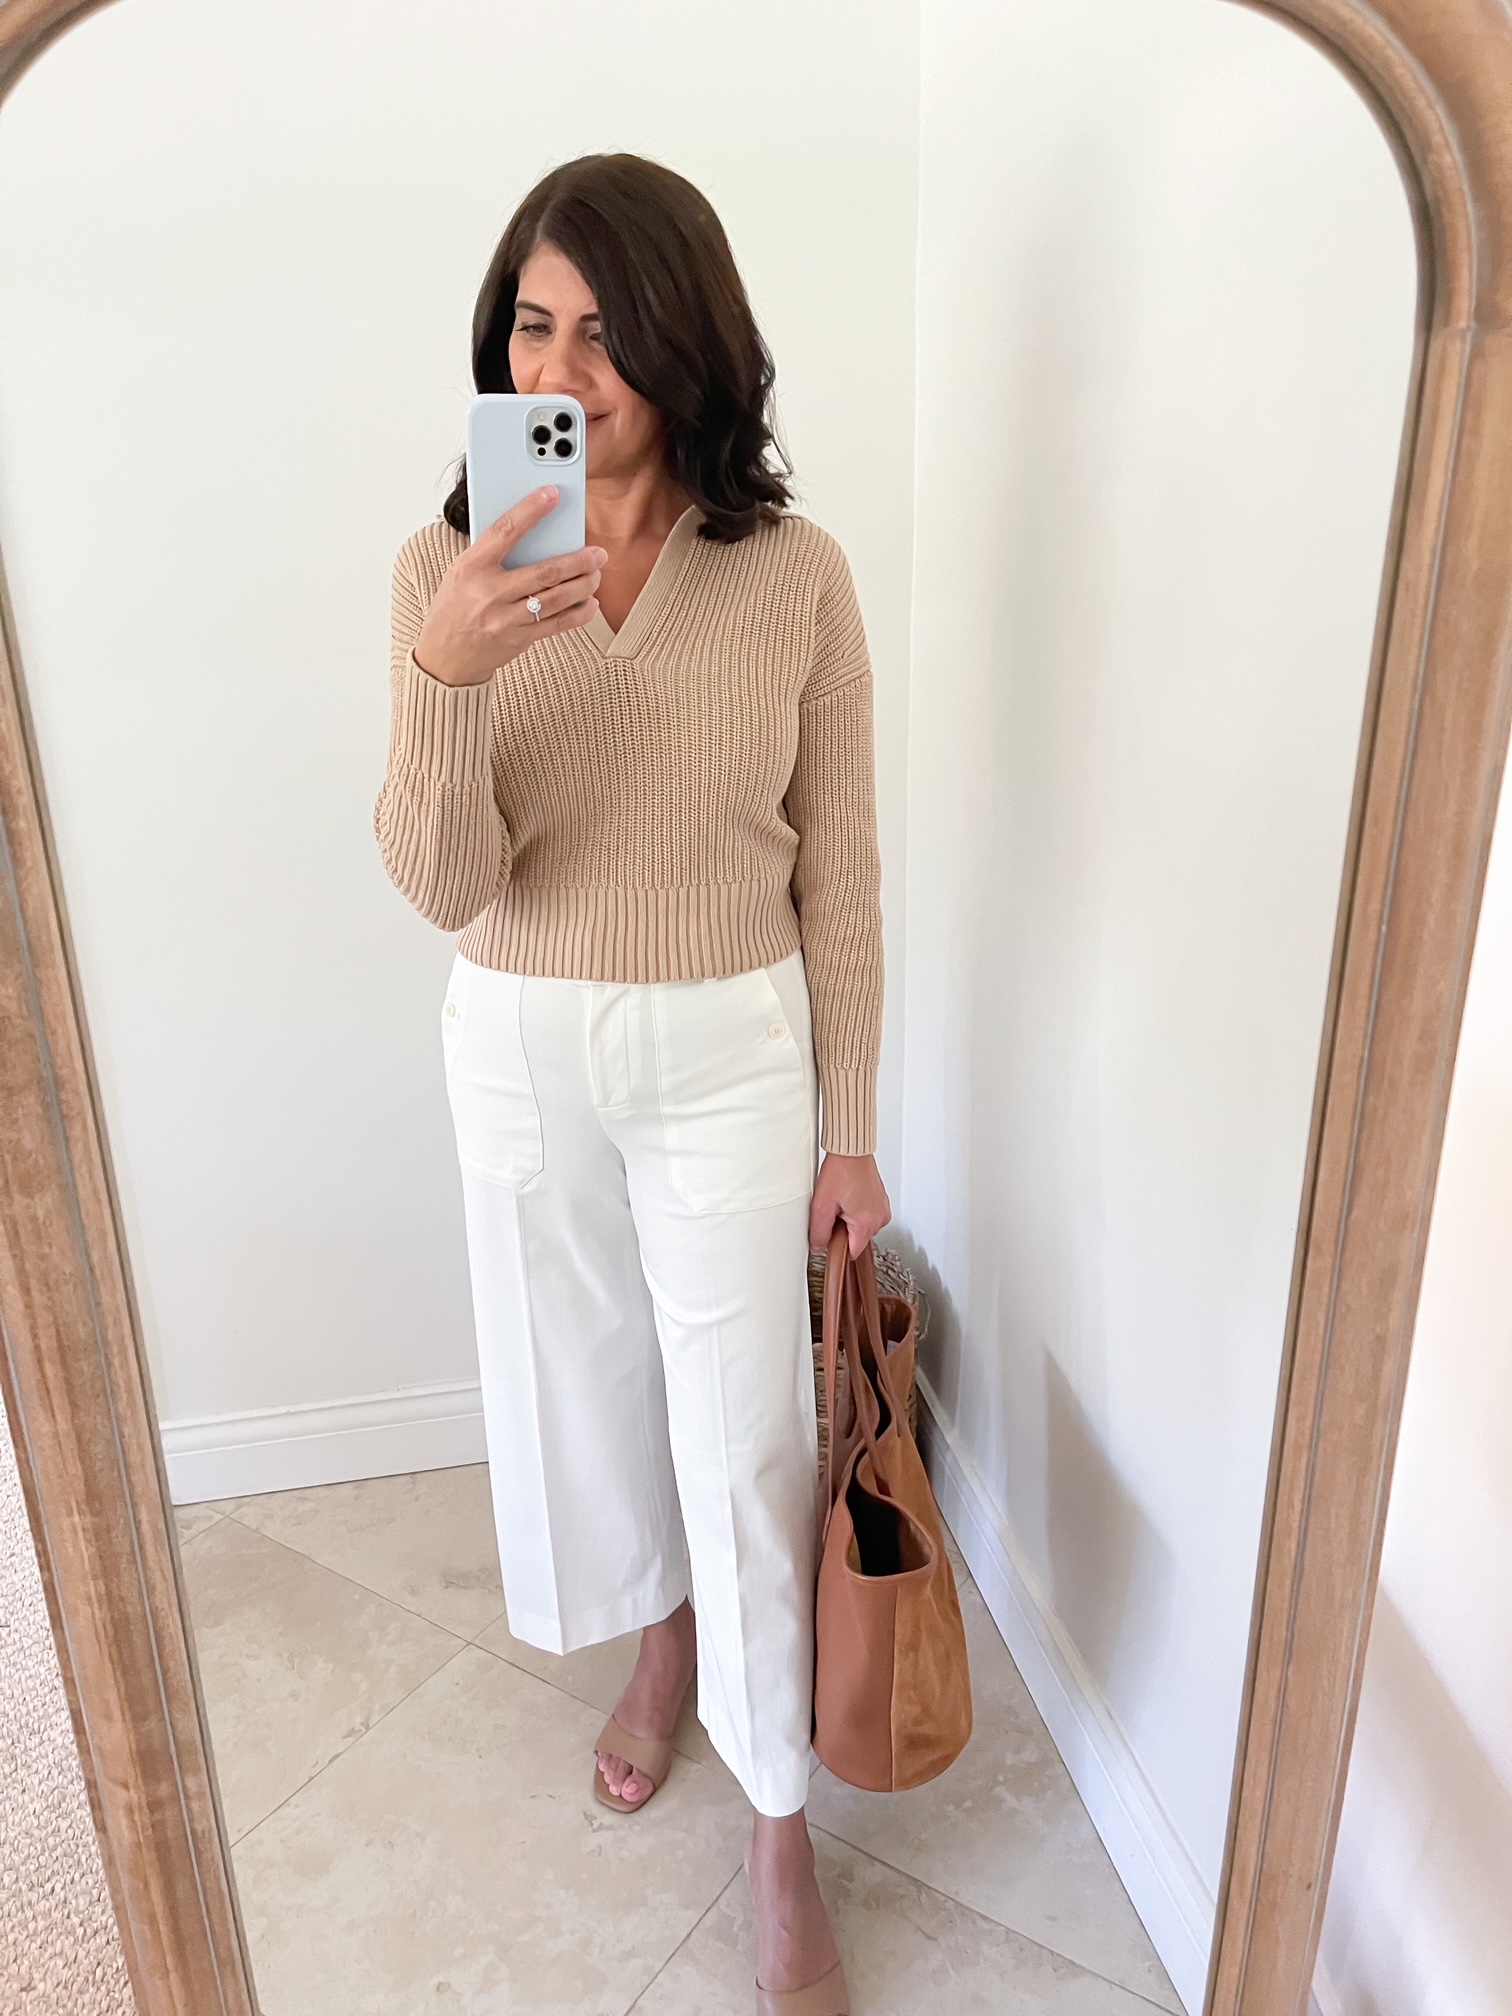 J.CREW WIDE LEG PANTS STYLED 5 WAYS FOR FALL by Desiree Leone of Beautifully Seaside